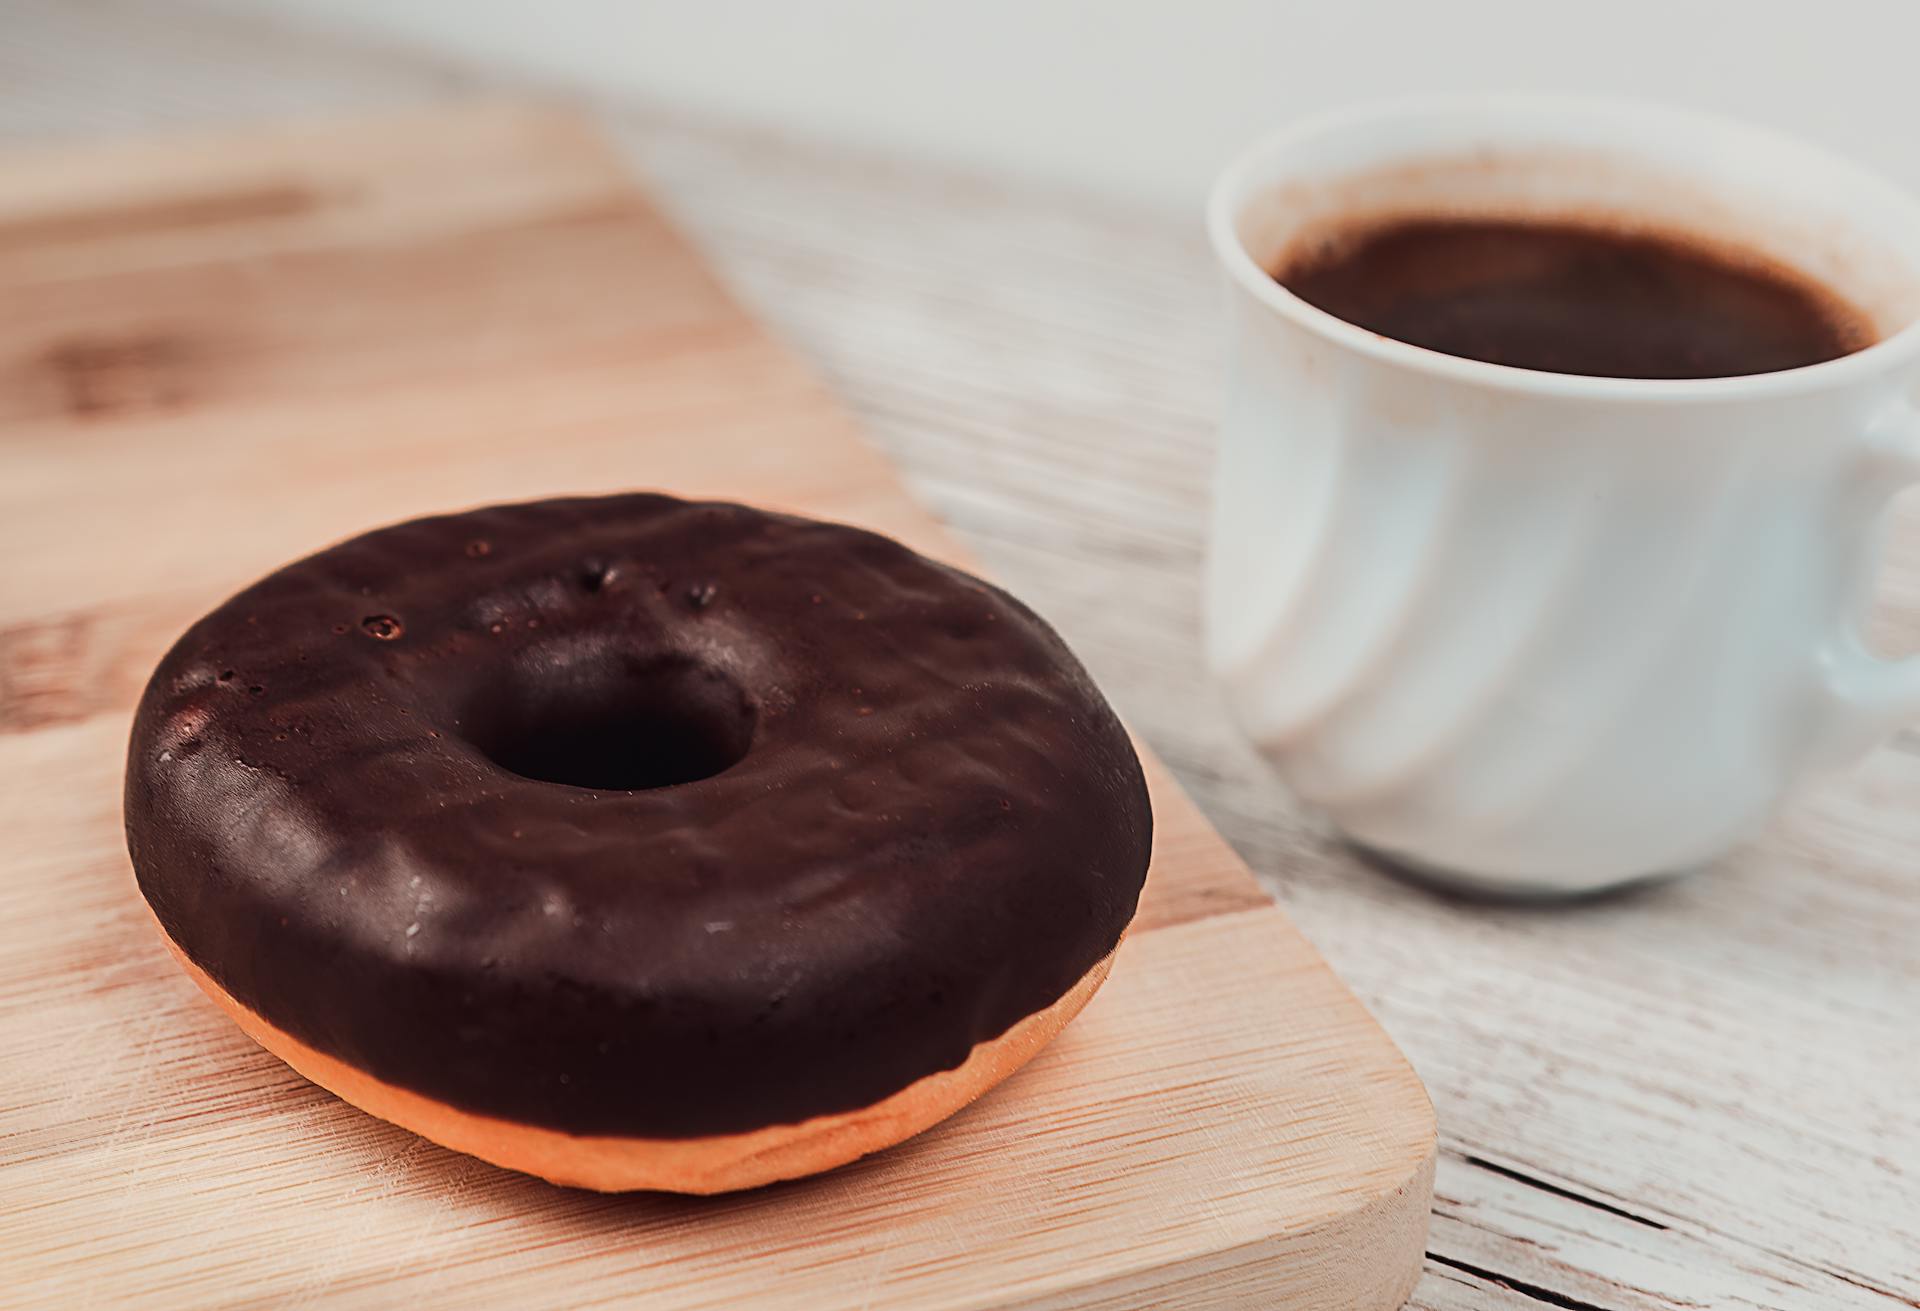 Chocolate donut and coffee | Source: Pexels